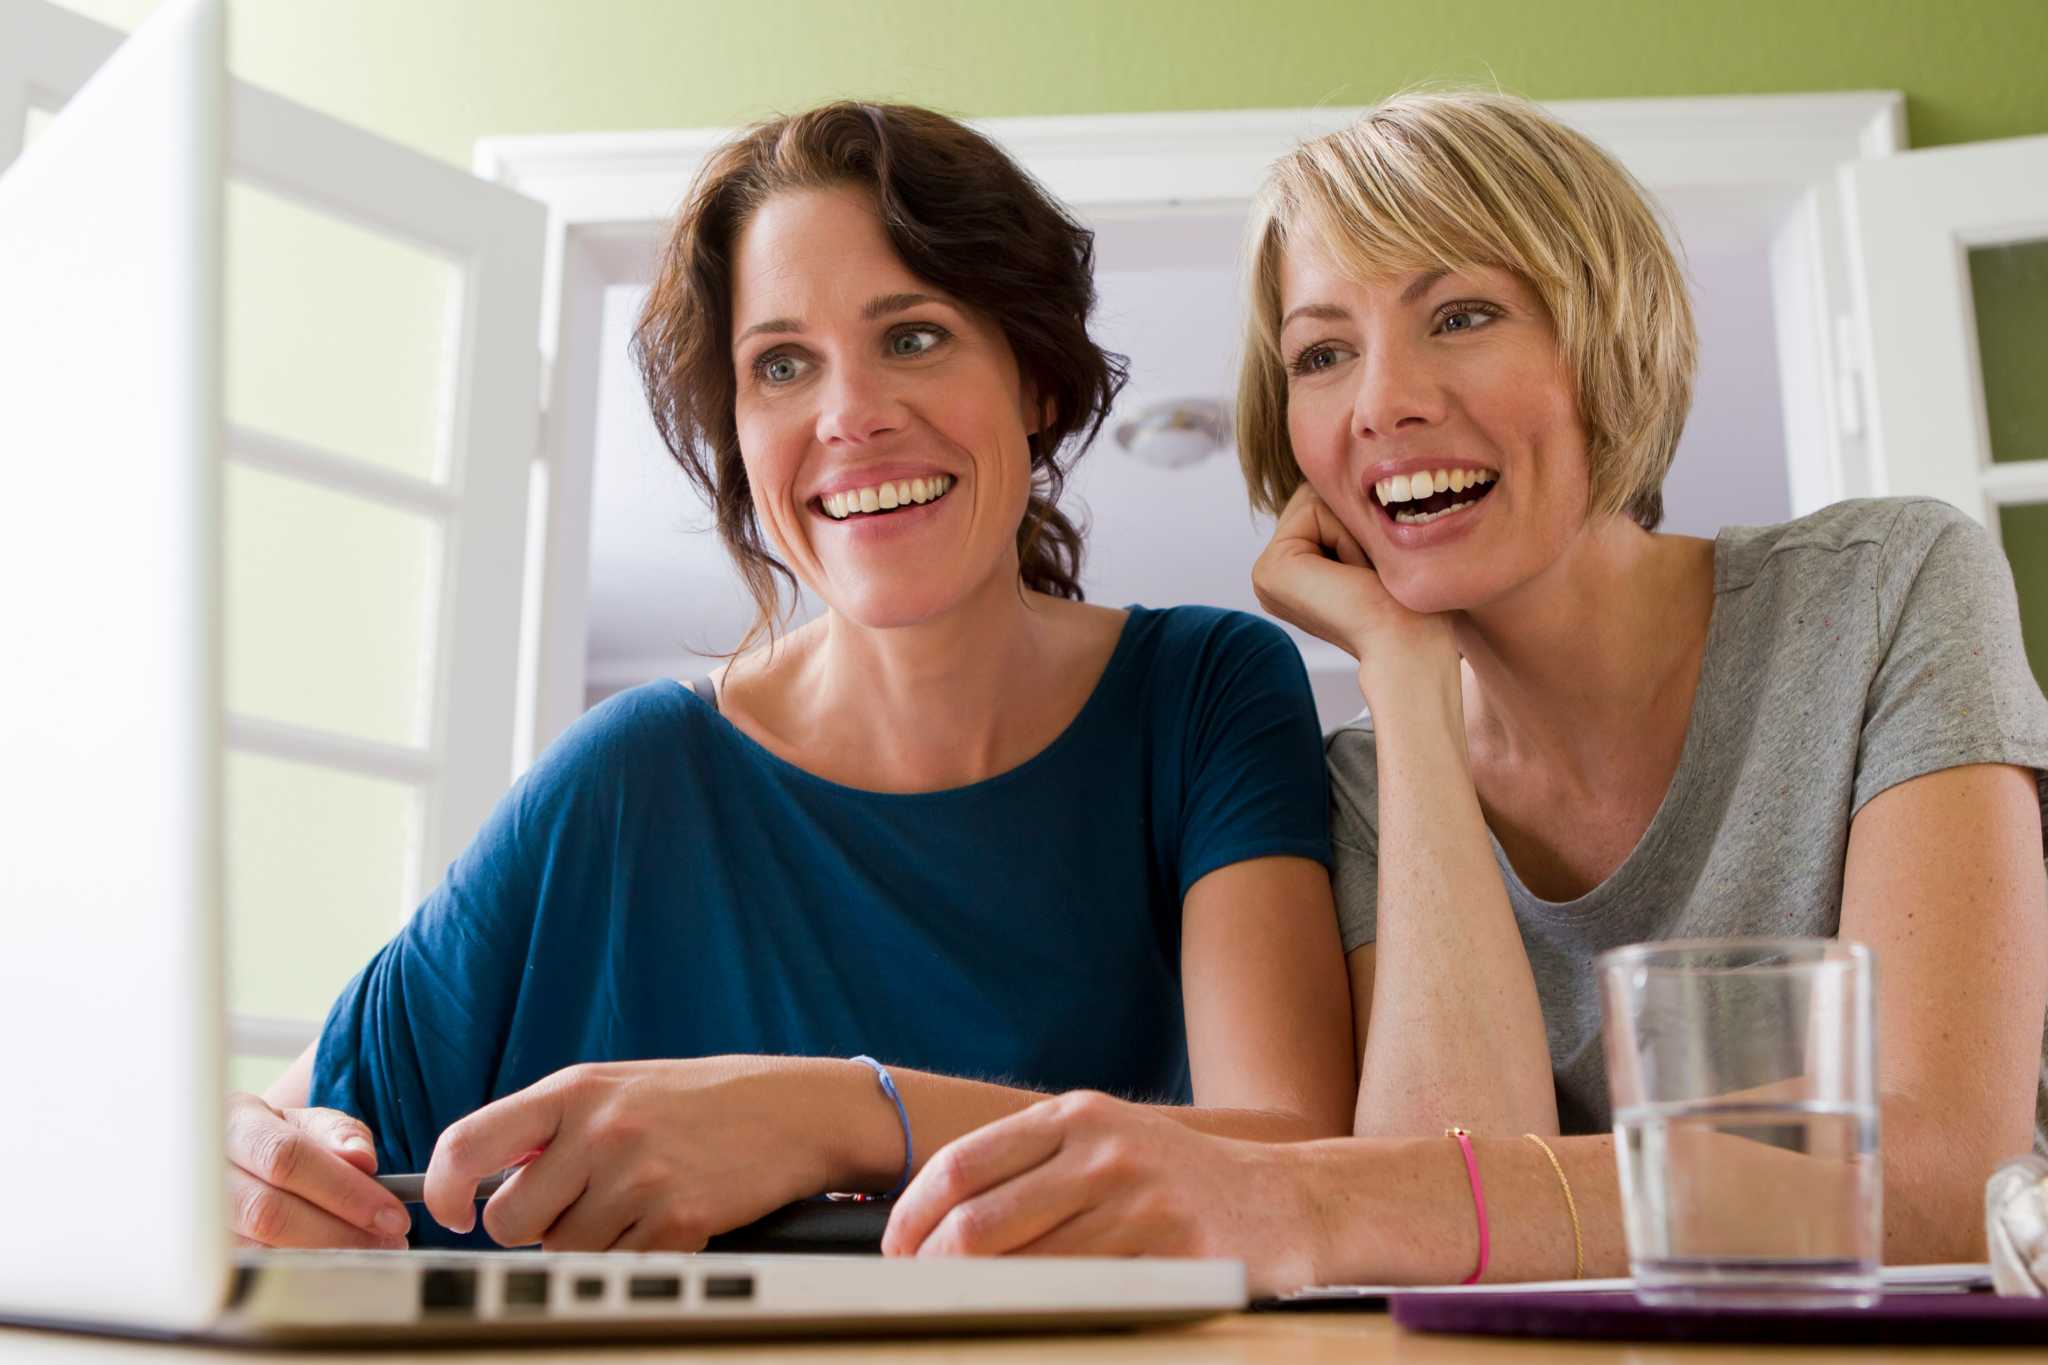 31 Stock Photos The Internet Is Almost Positive Are Of Lesbians